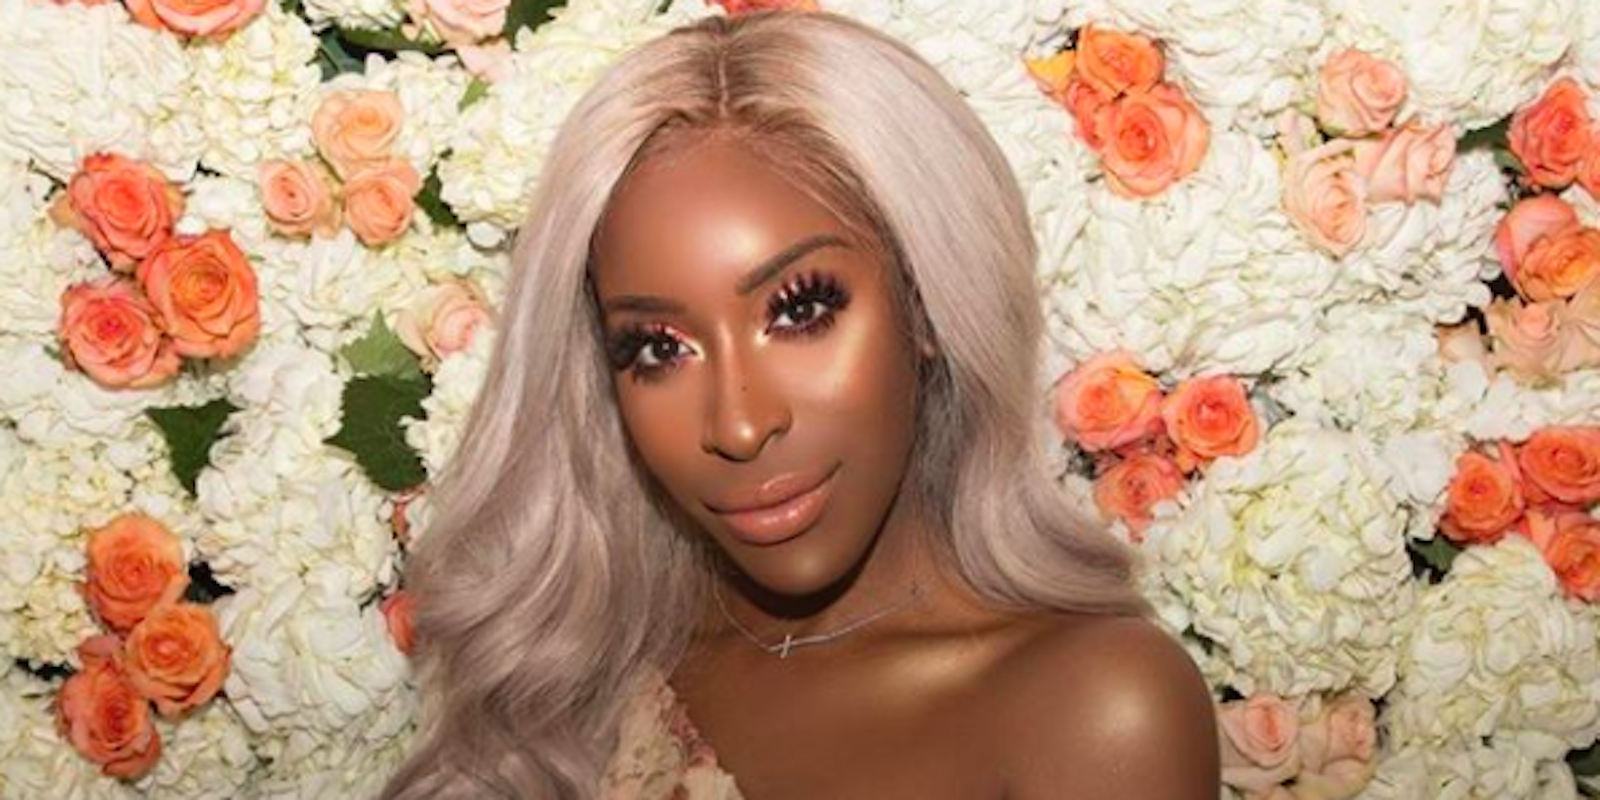 Jackie Aina discusses issues of colorism in the beauty industry